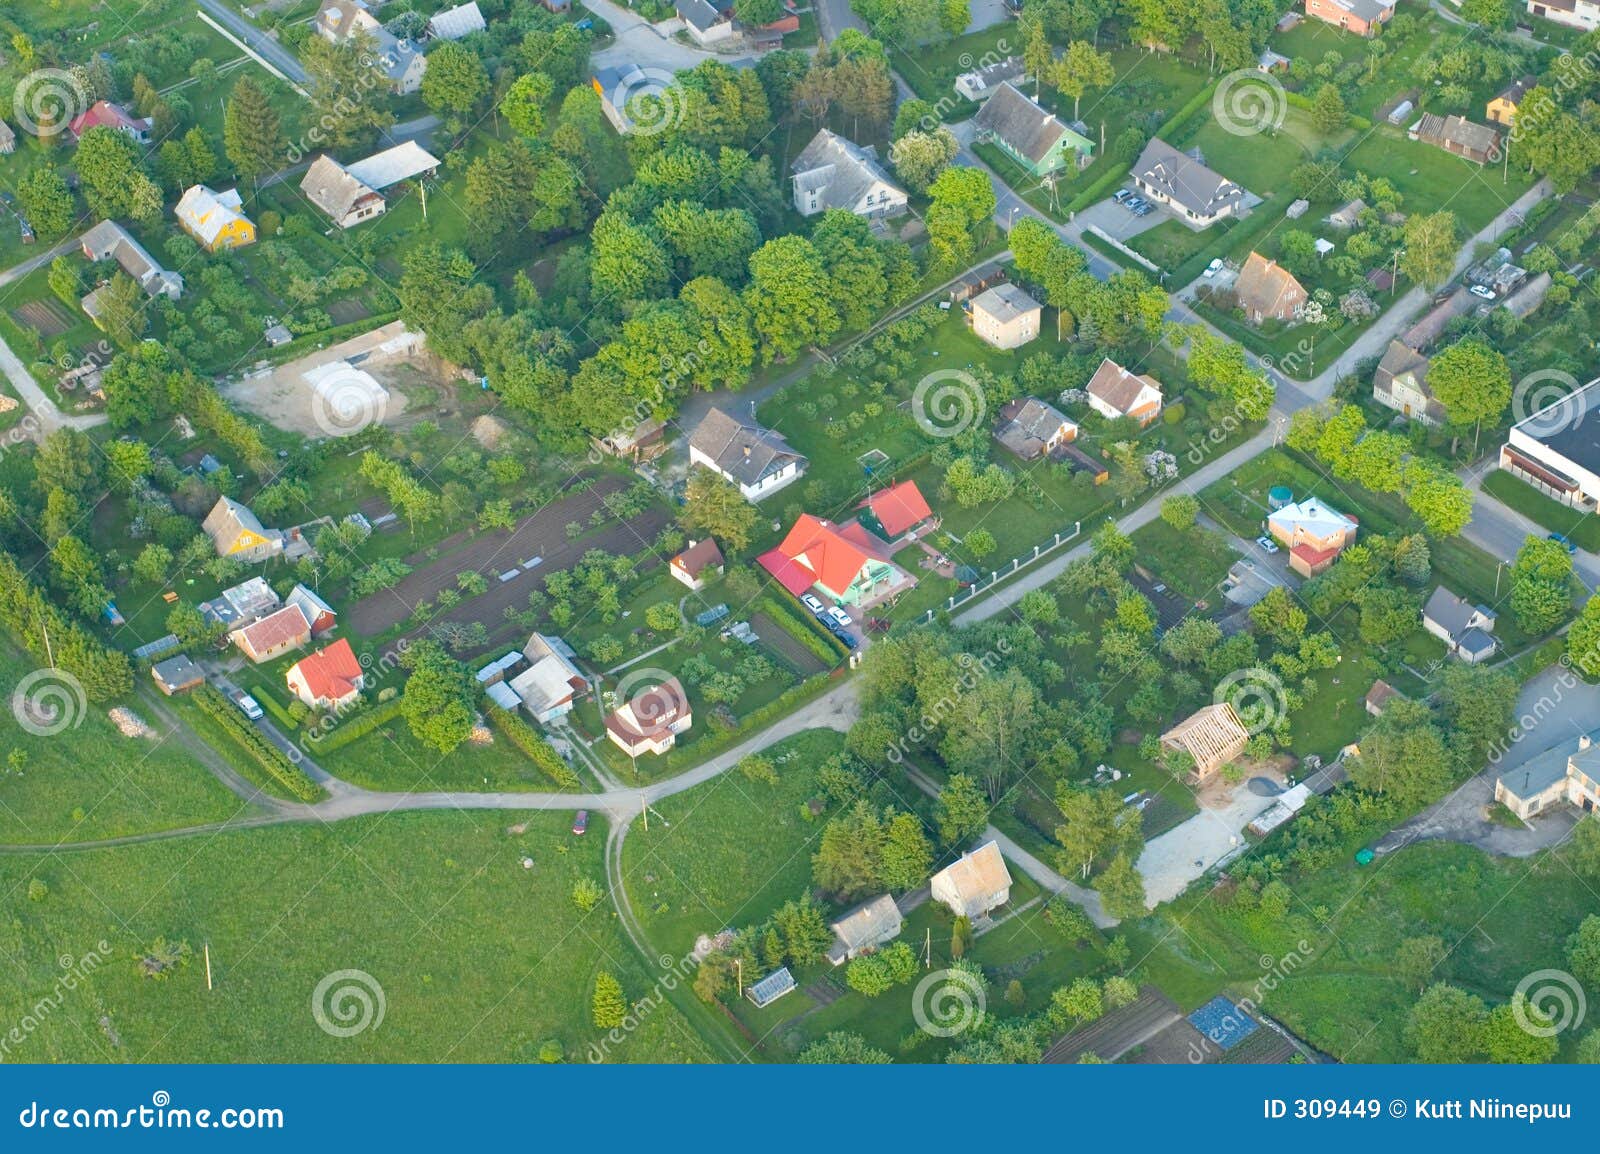 areal view of a settlement